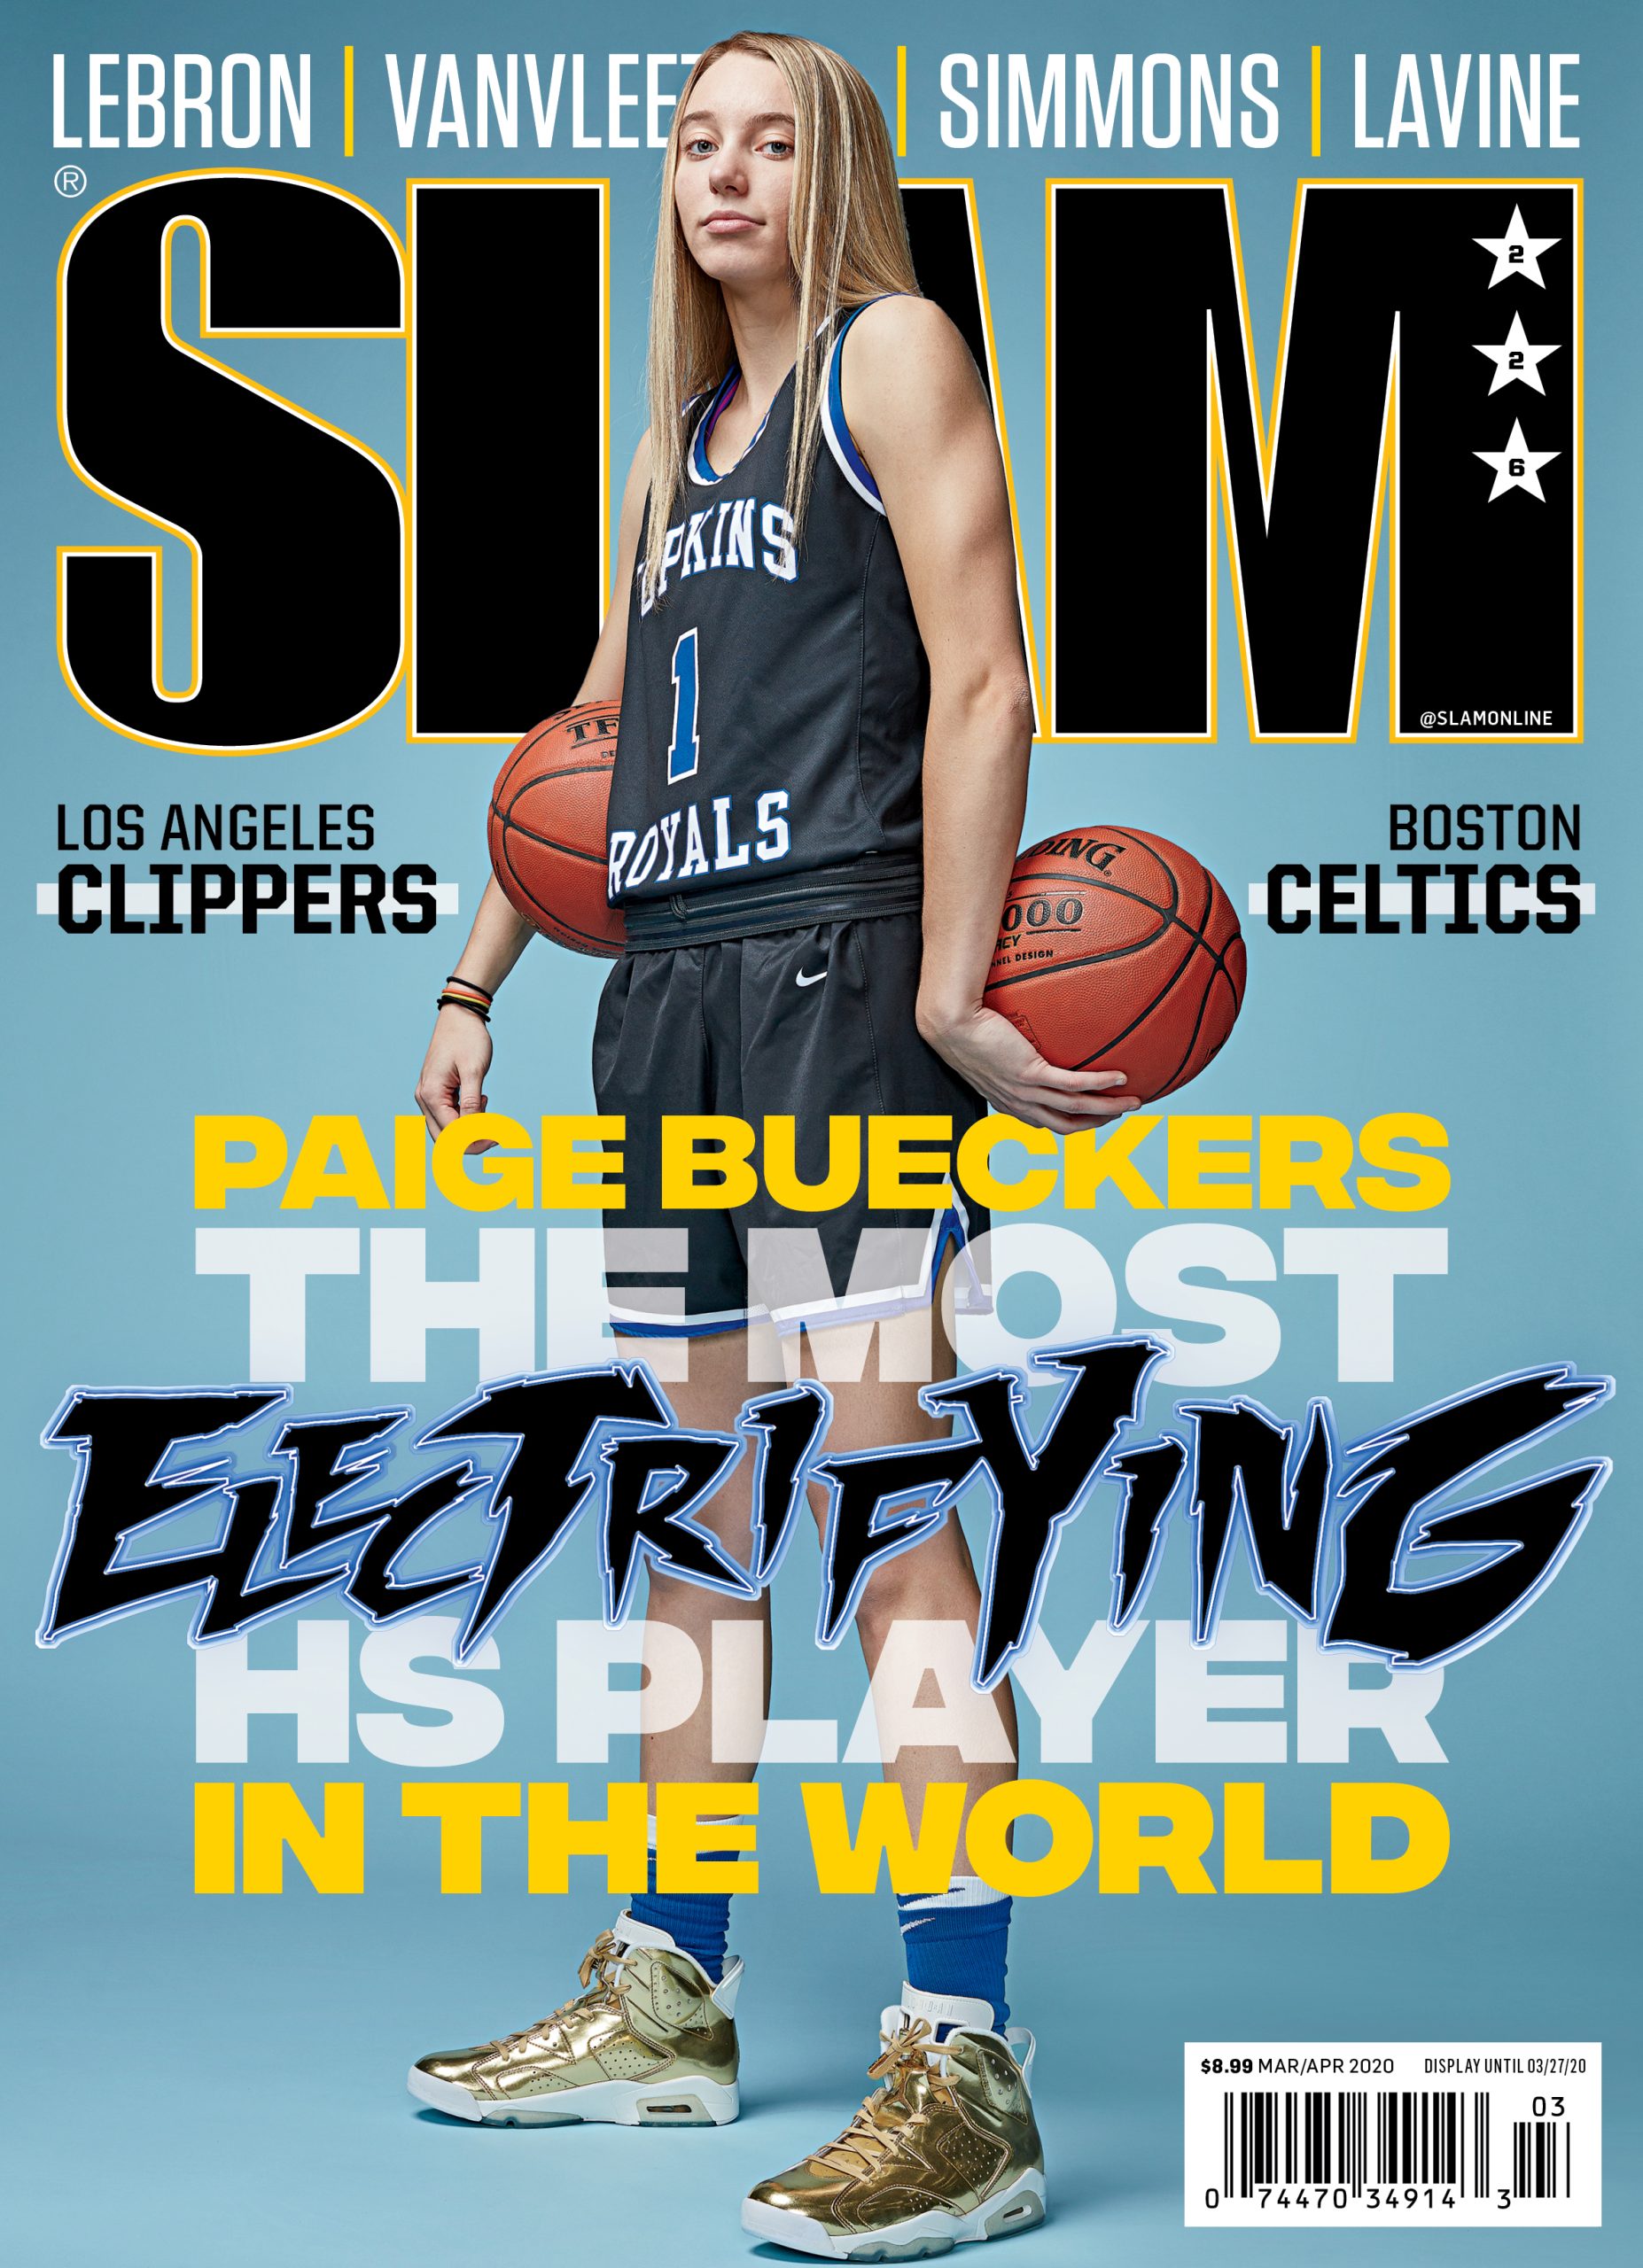 THE 30 PLAYERS WHO DEFINED SLAM’S 30 YEARS: Paige Bueckers 